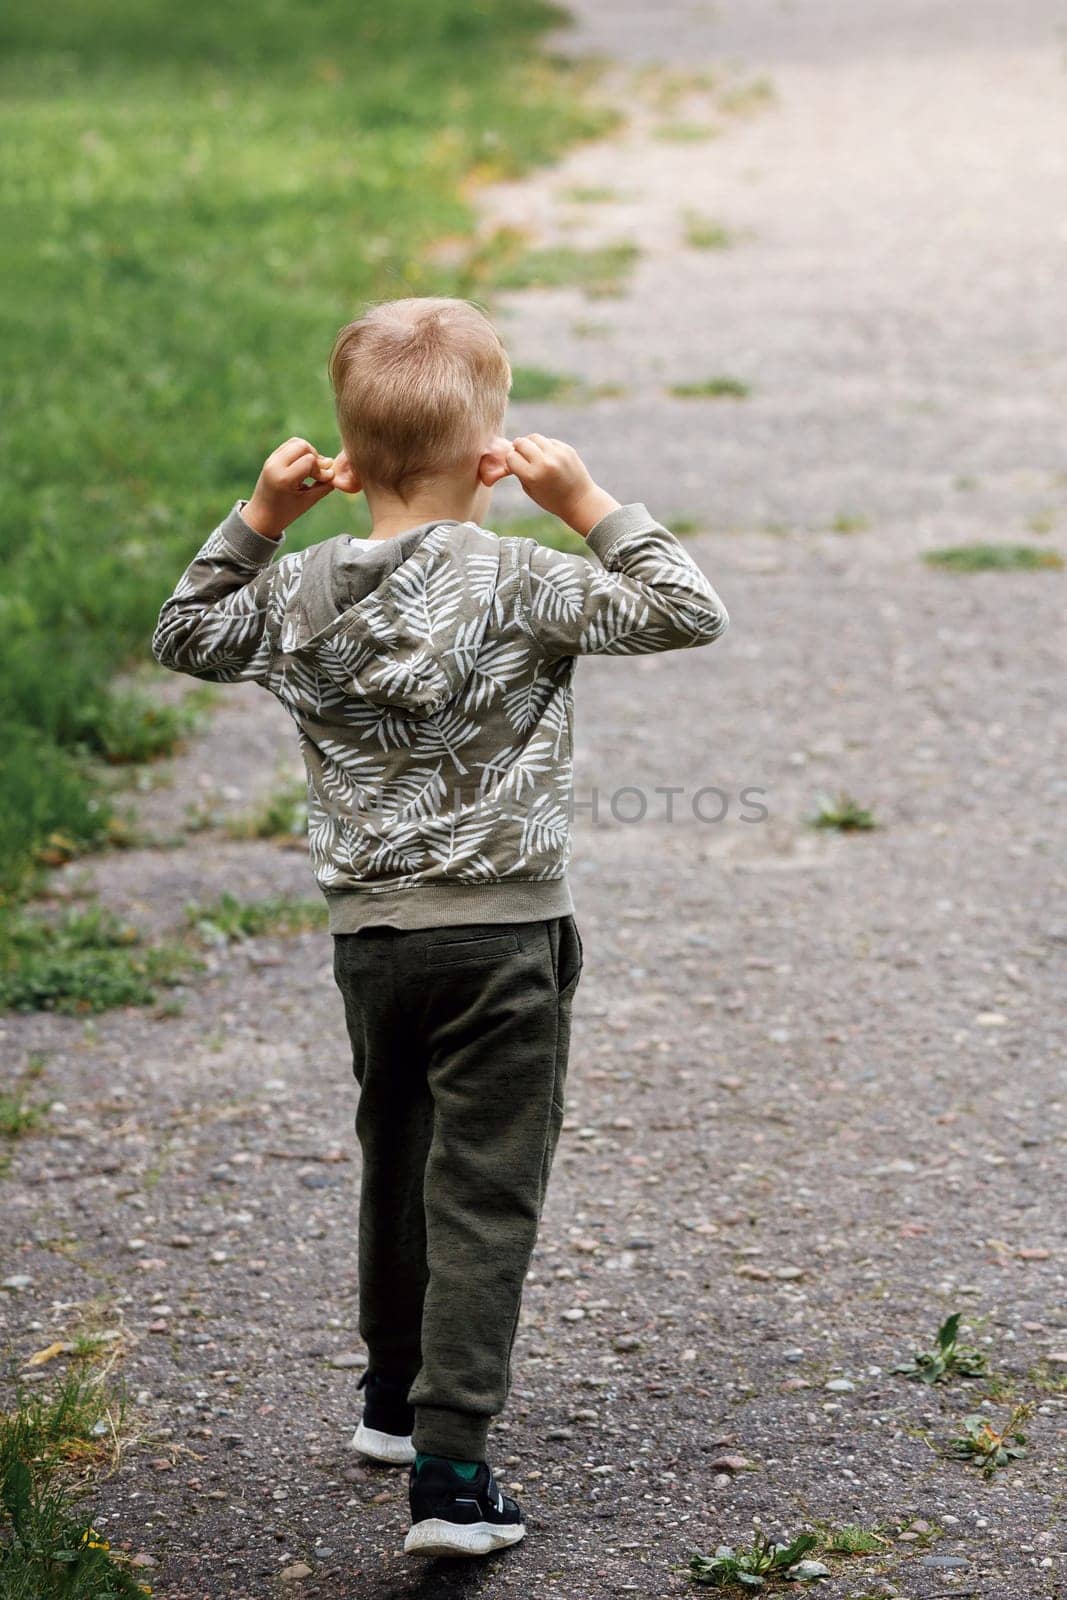 The little boy walks down the road, (rear view) he stretches his ears hard, the child experiments with his body.